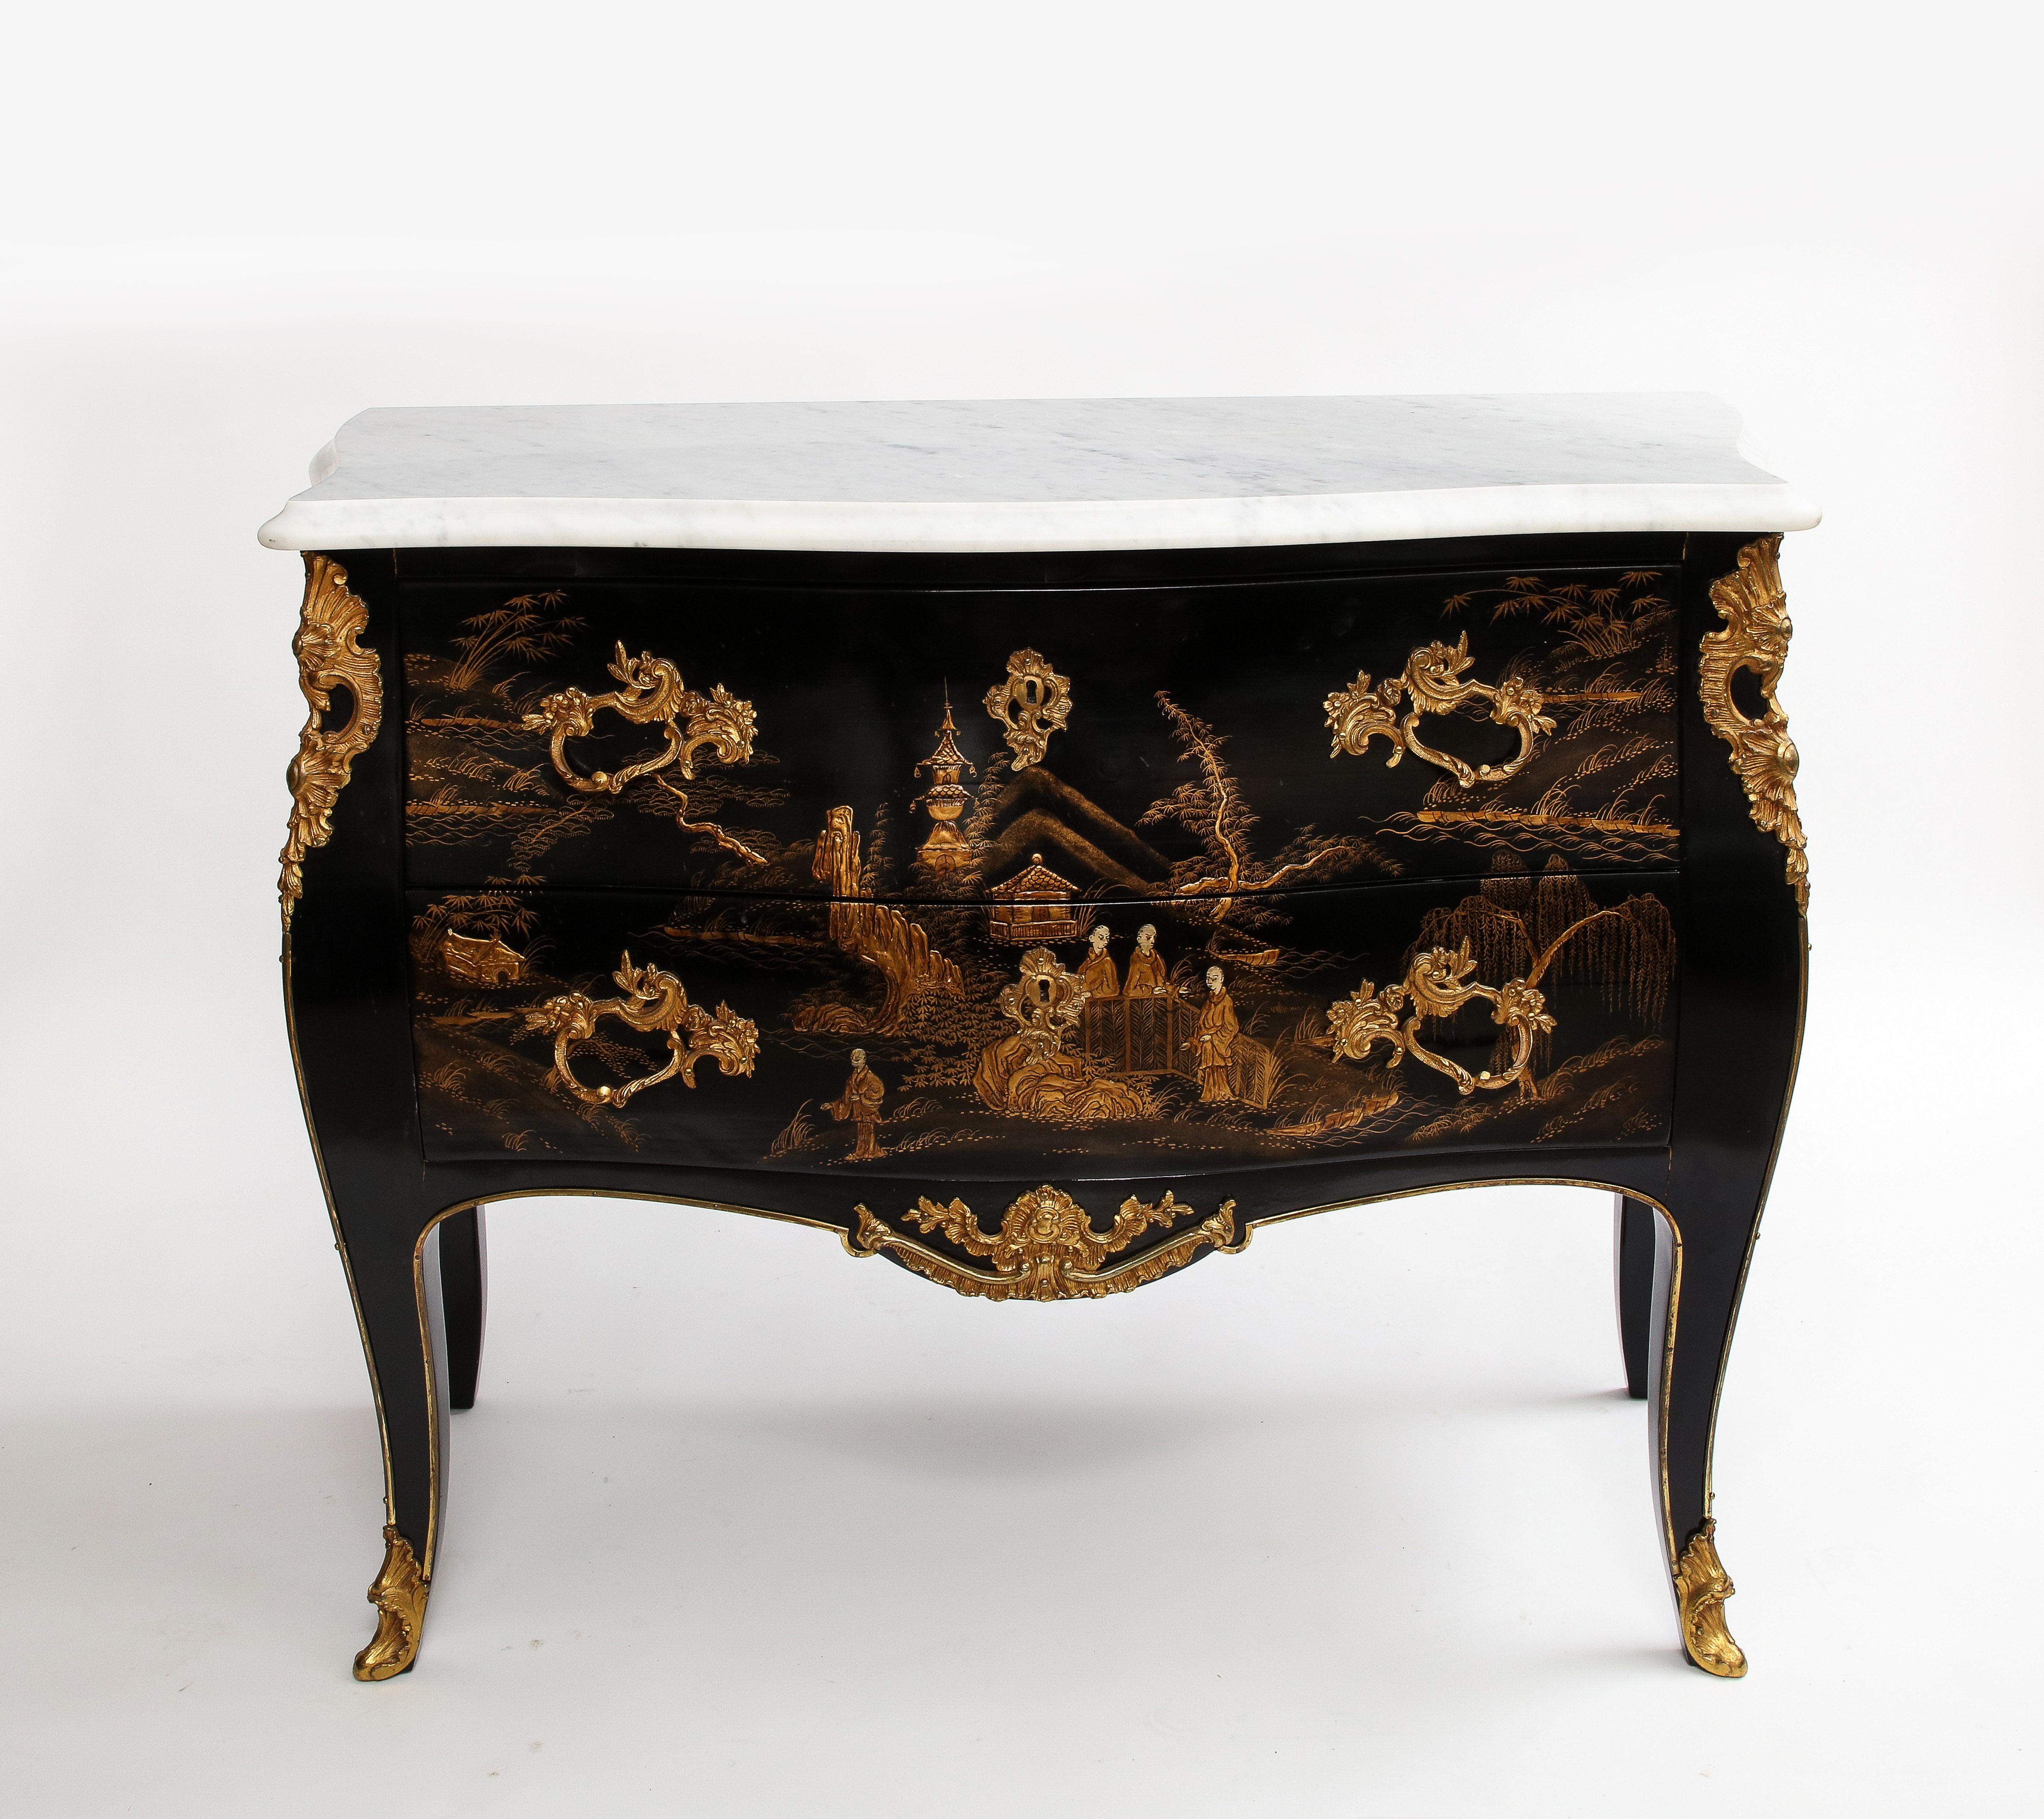 A Fine and Rare Pair of French Chinoiserie Lacquered & Gilt Marble Top 2-Drawer Commodes, Attributed to Jansen.  These exquisite pieces showcase a scalloped predominantly white variegated marble top and two stacked drawers, adorned with meticulously